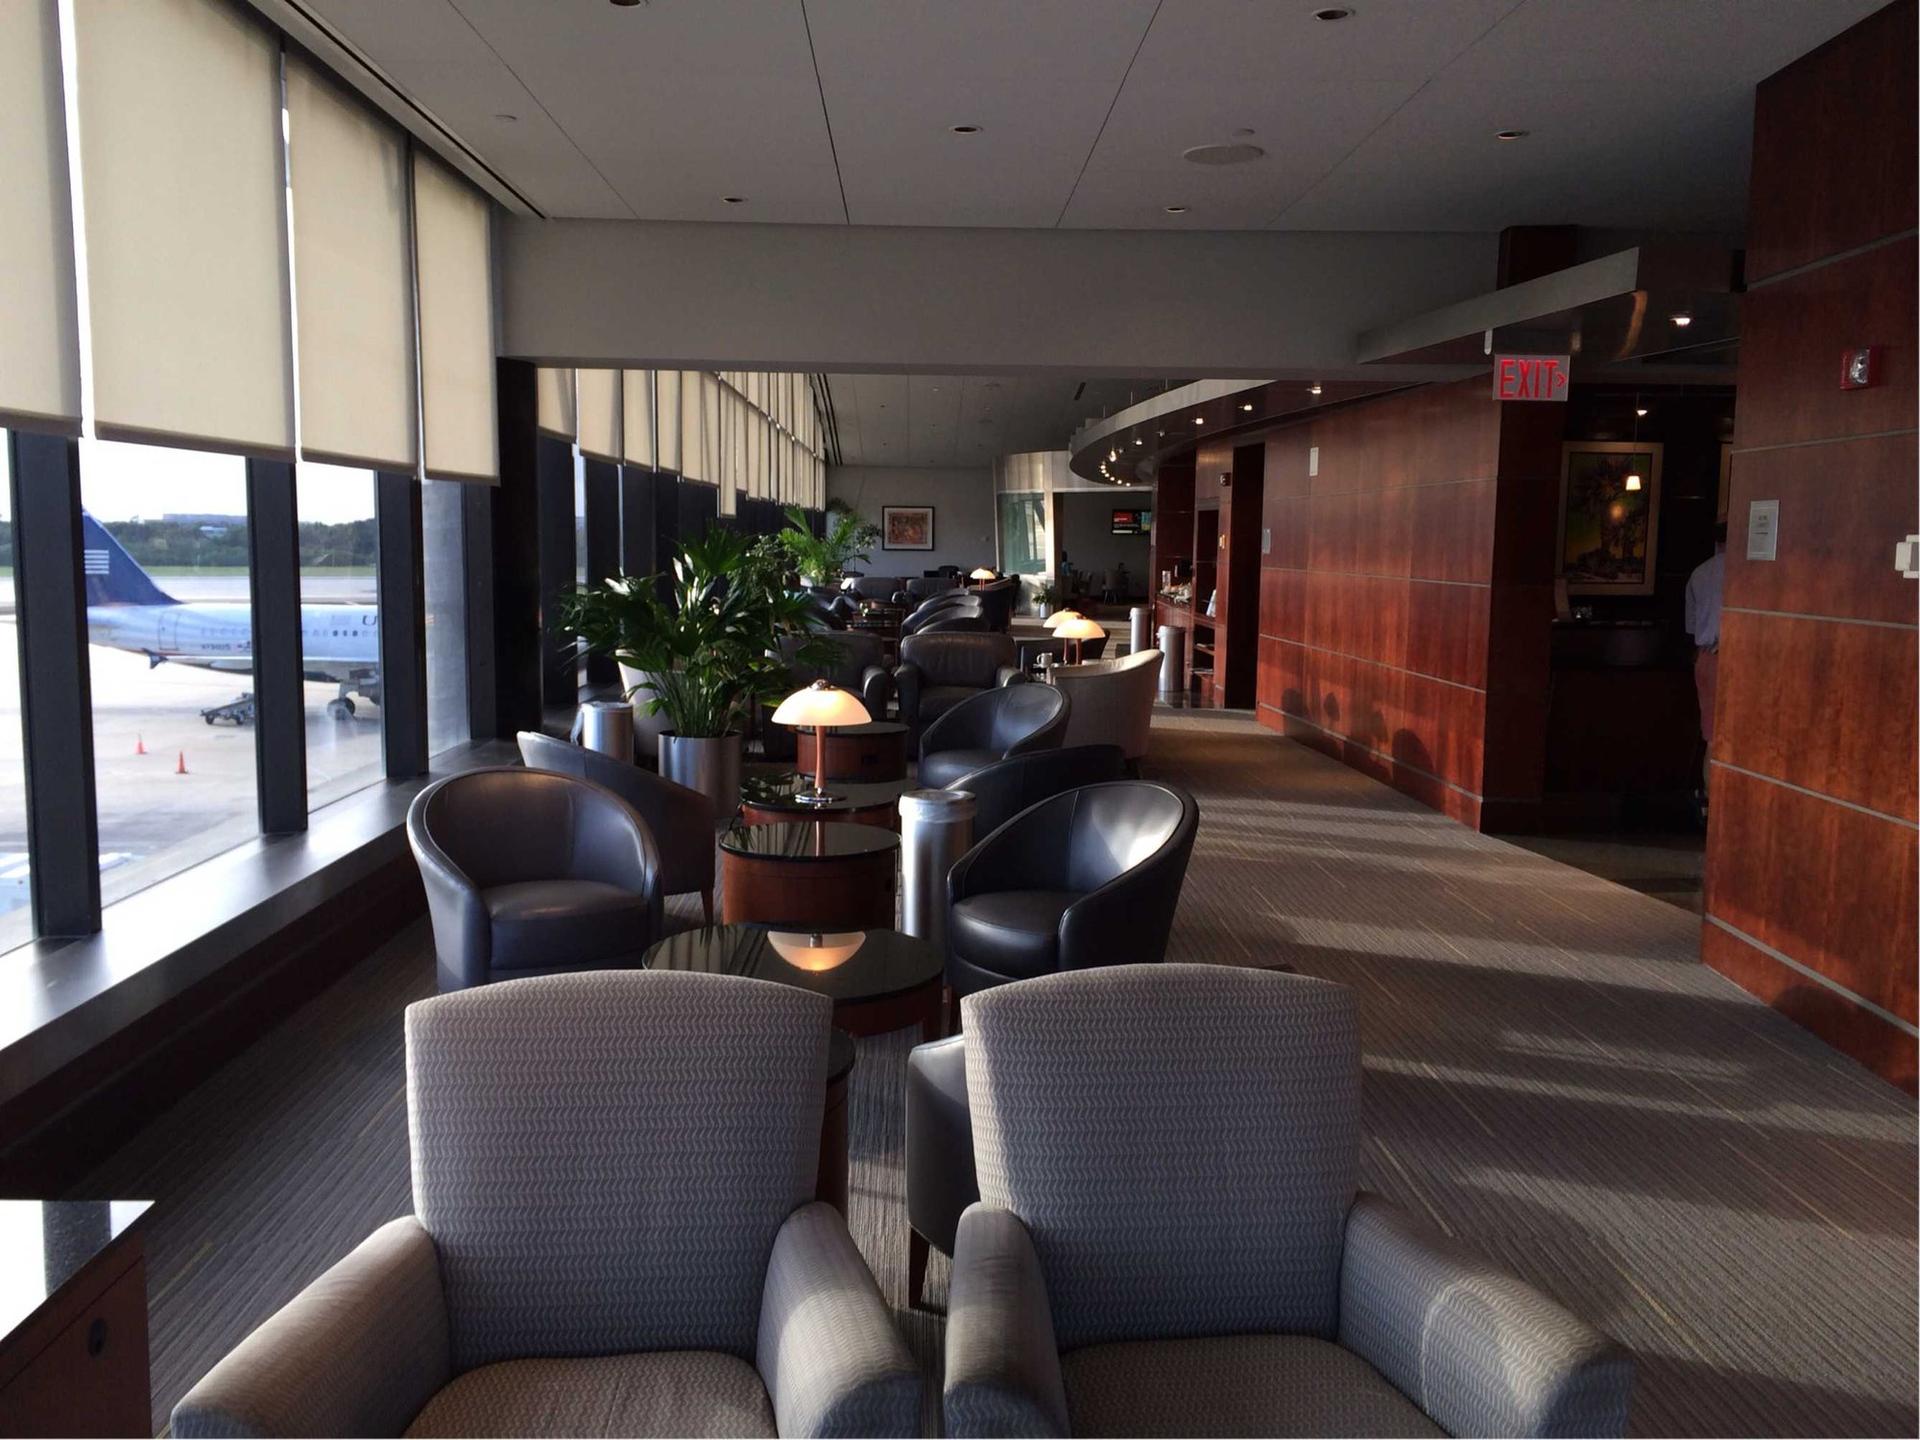 American Airlines Admirals Club image 13 of 20